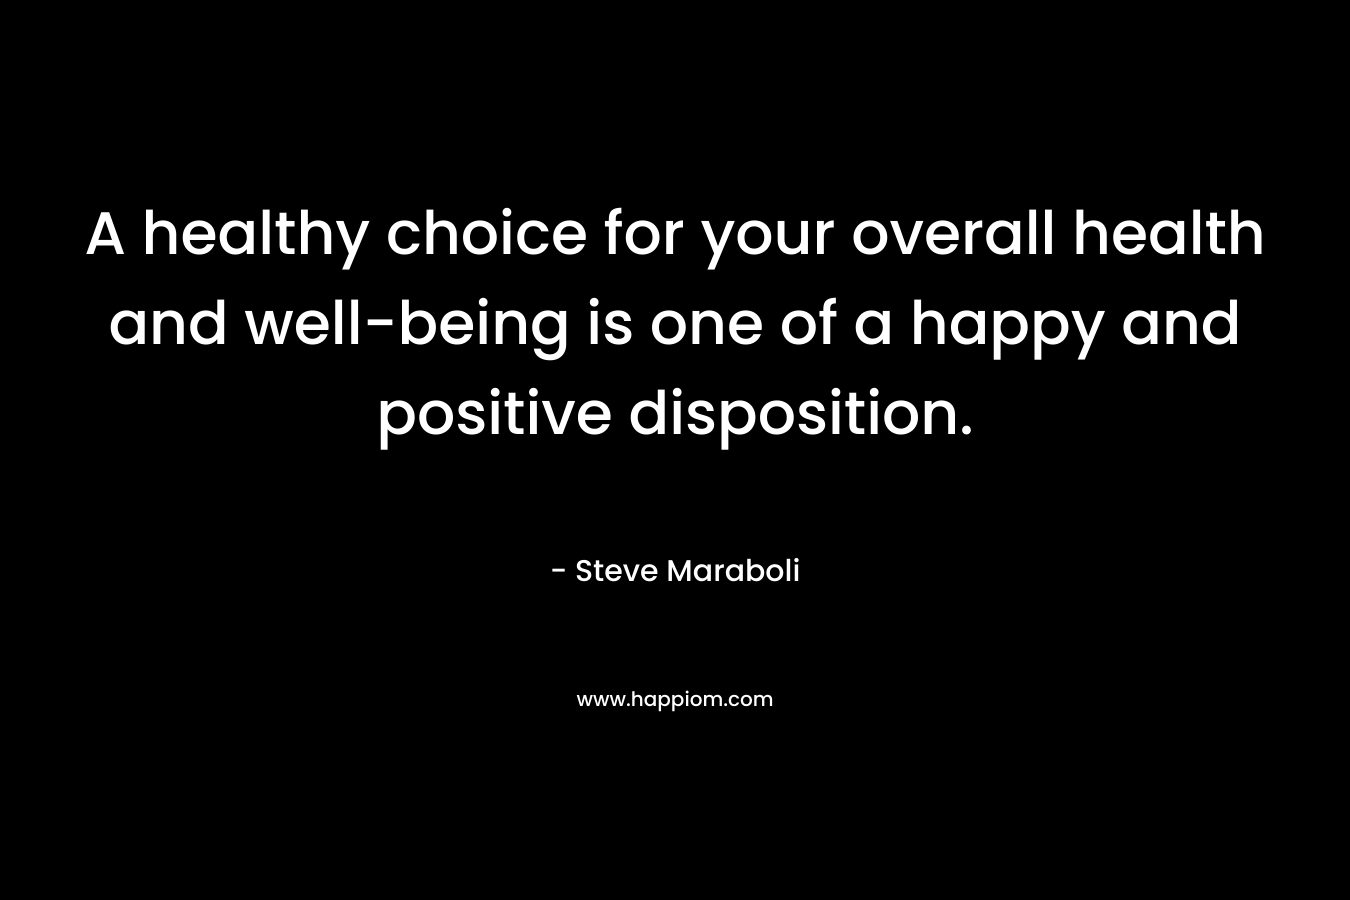 A healthy choice for your overall health and well-being is one of a happy and positive disposition. – Steve Maraboli